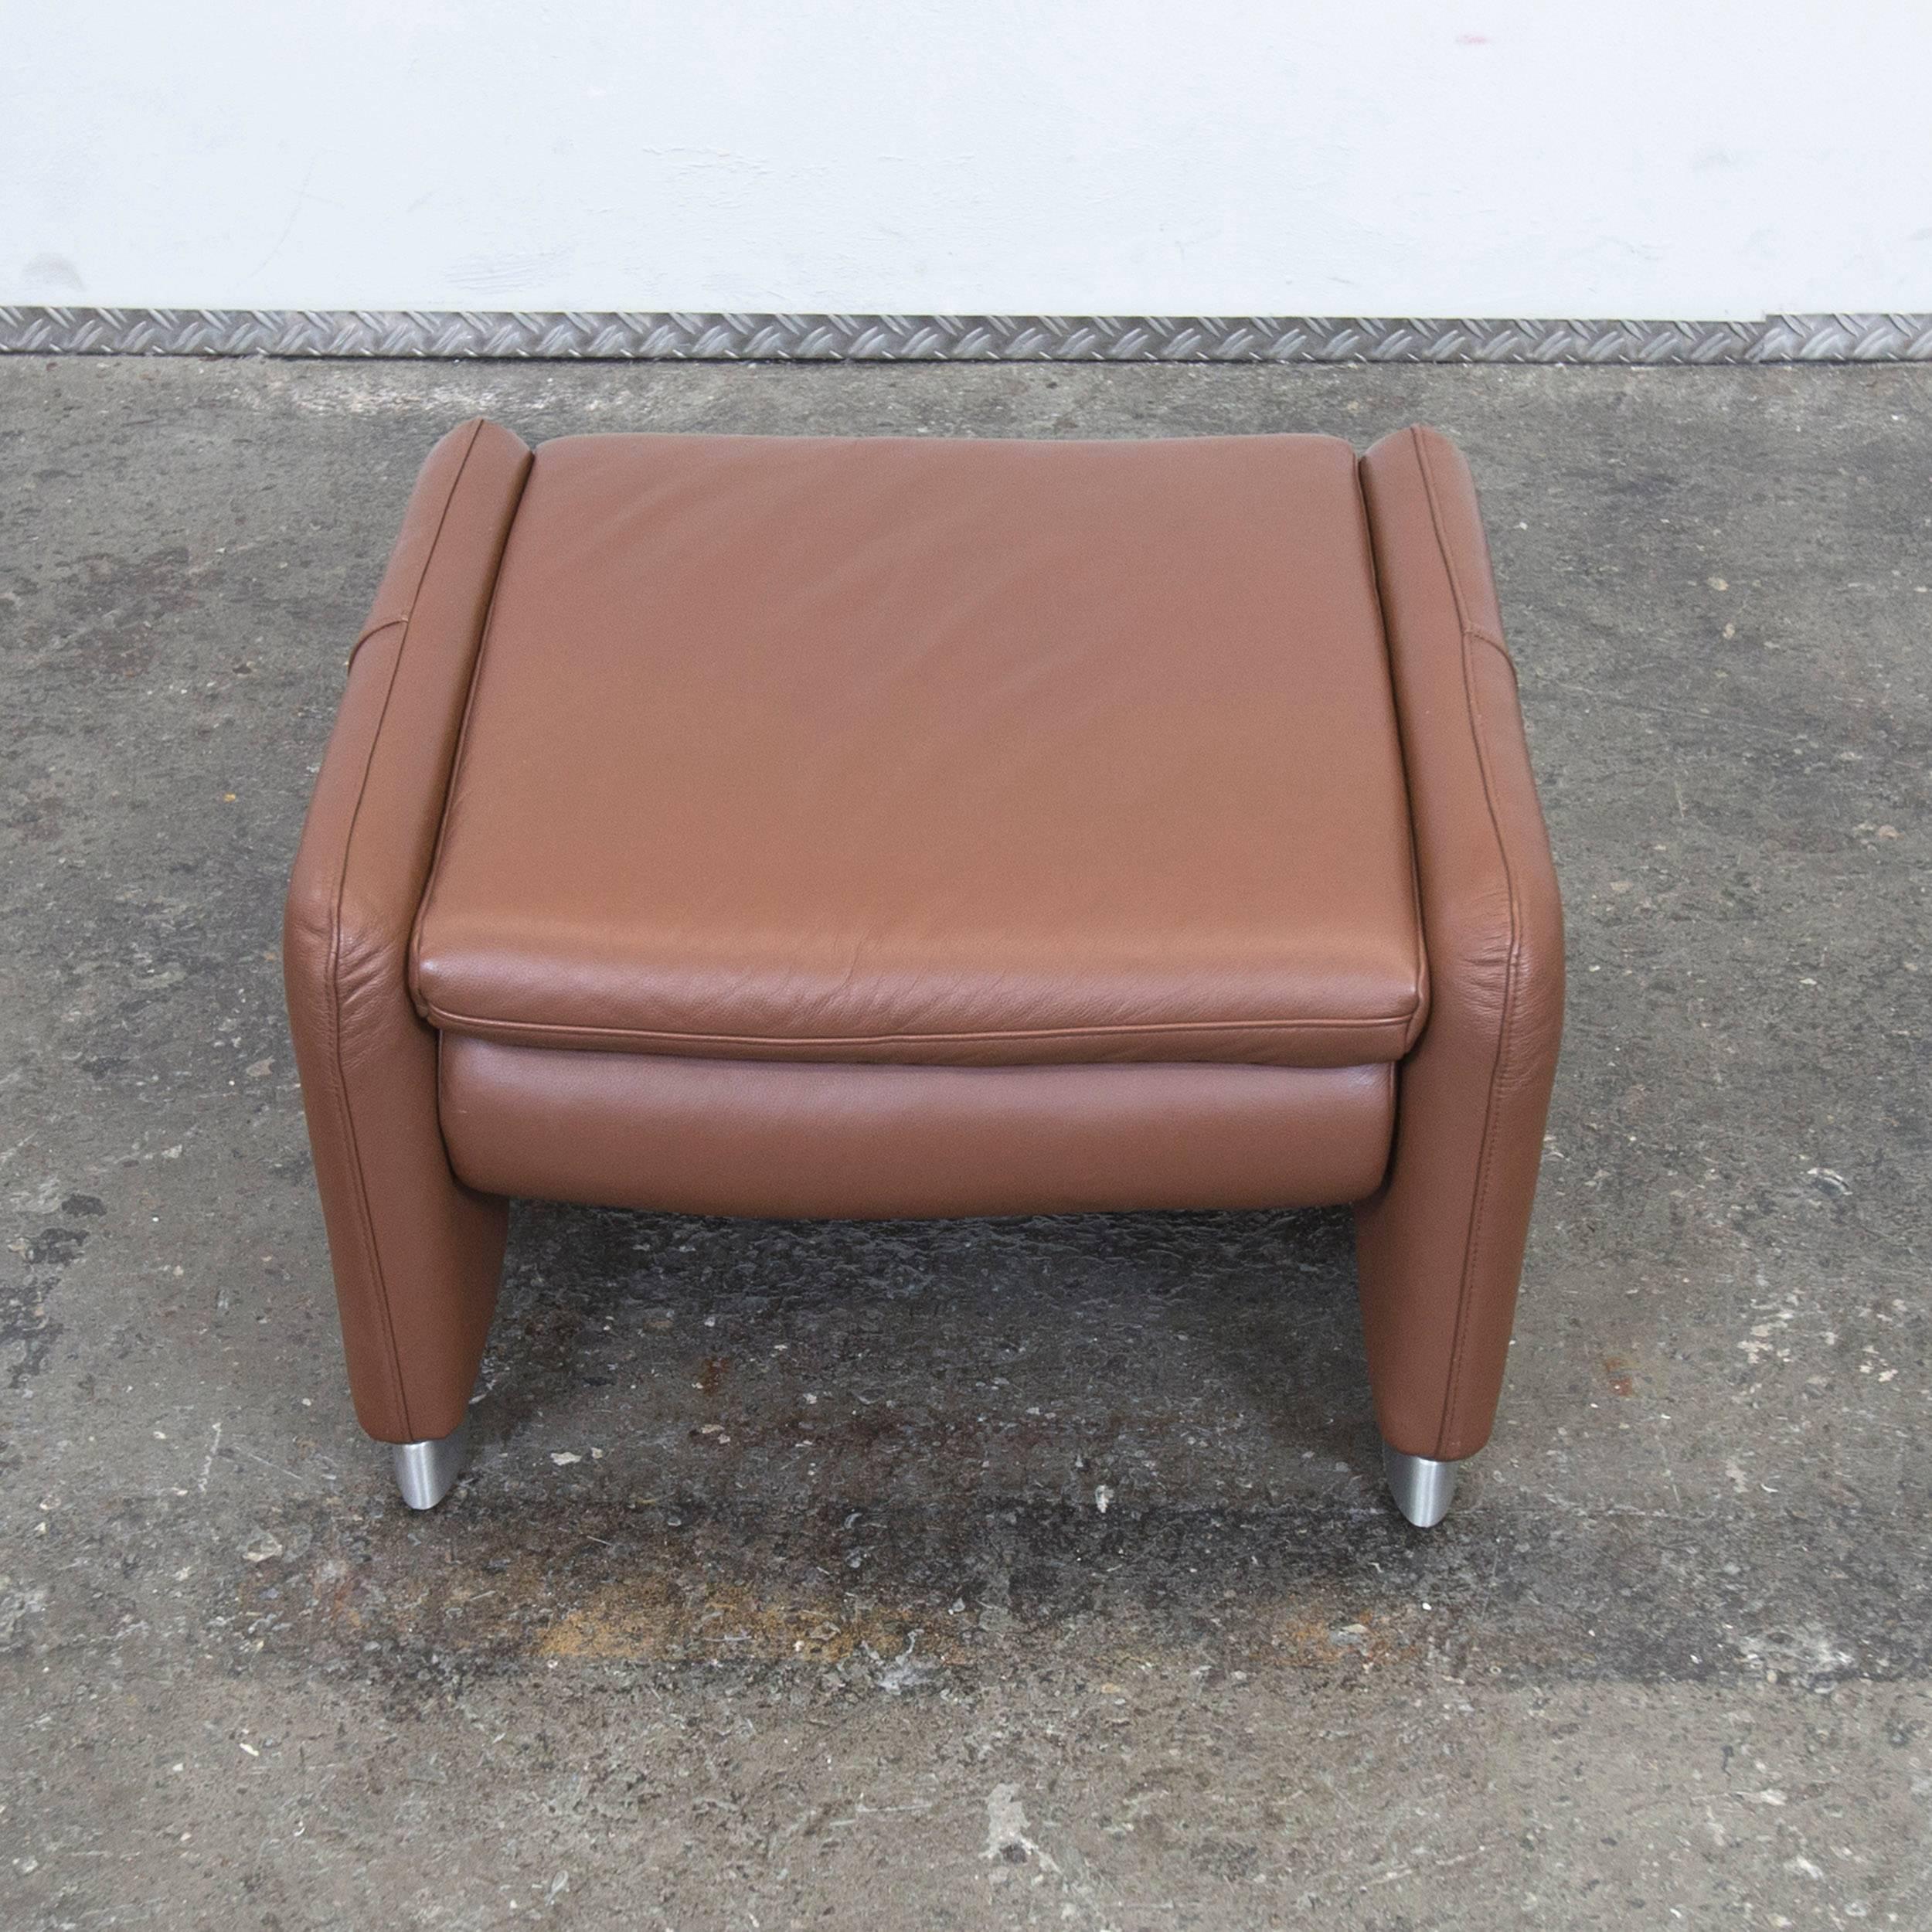 Brown colored Hülsta designer footstool with a modern style, designed for pure comfort.